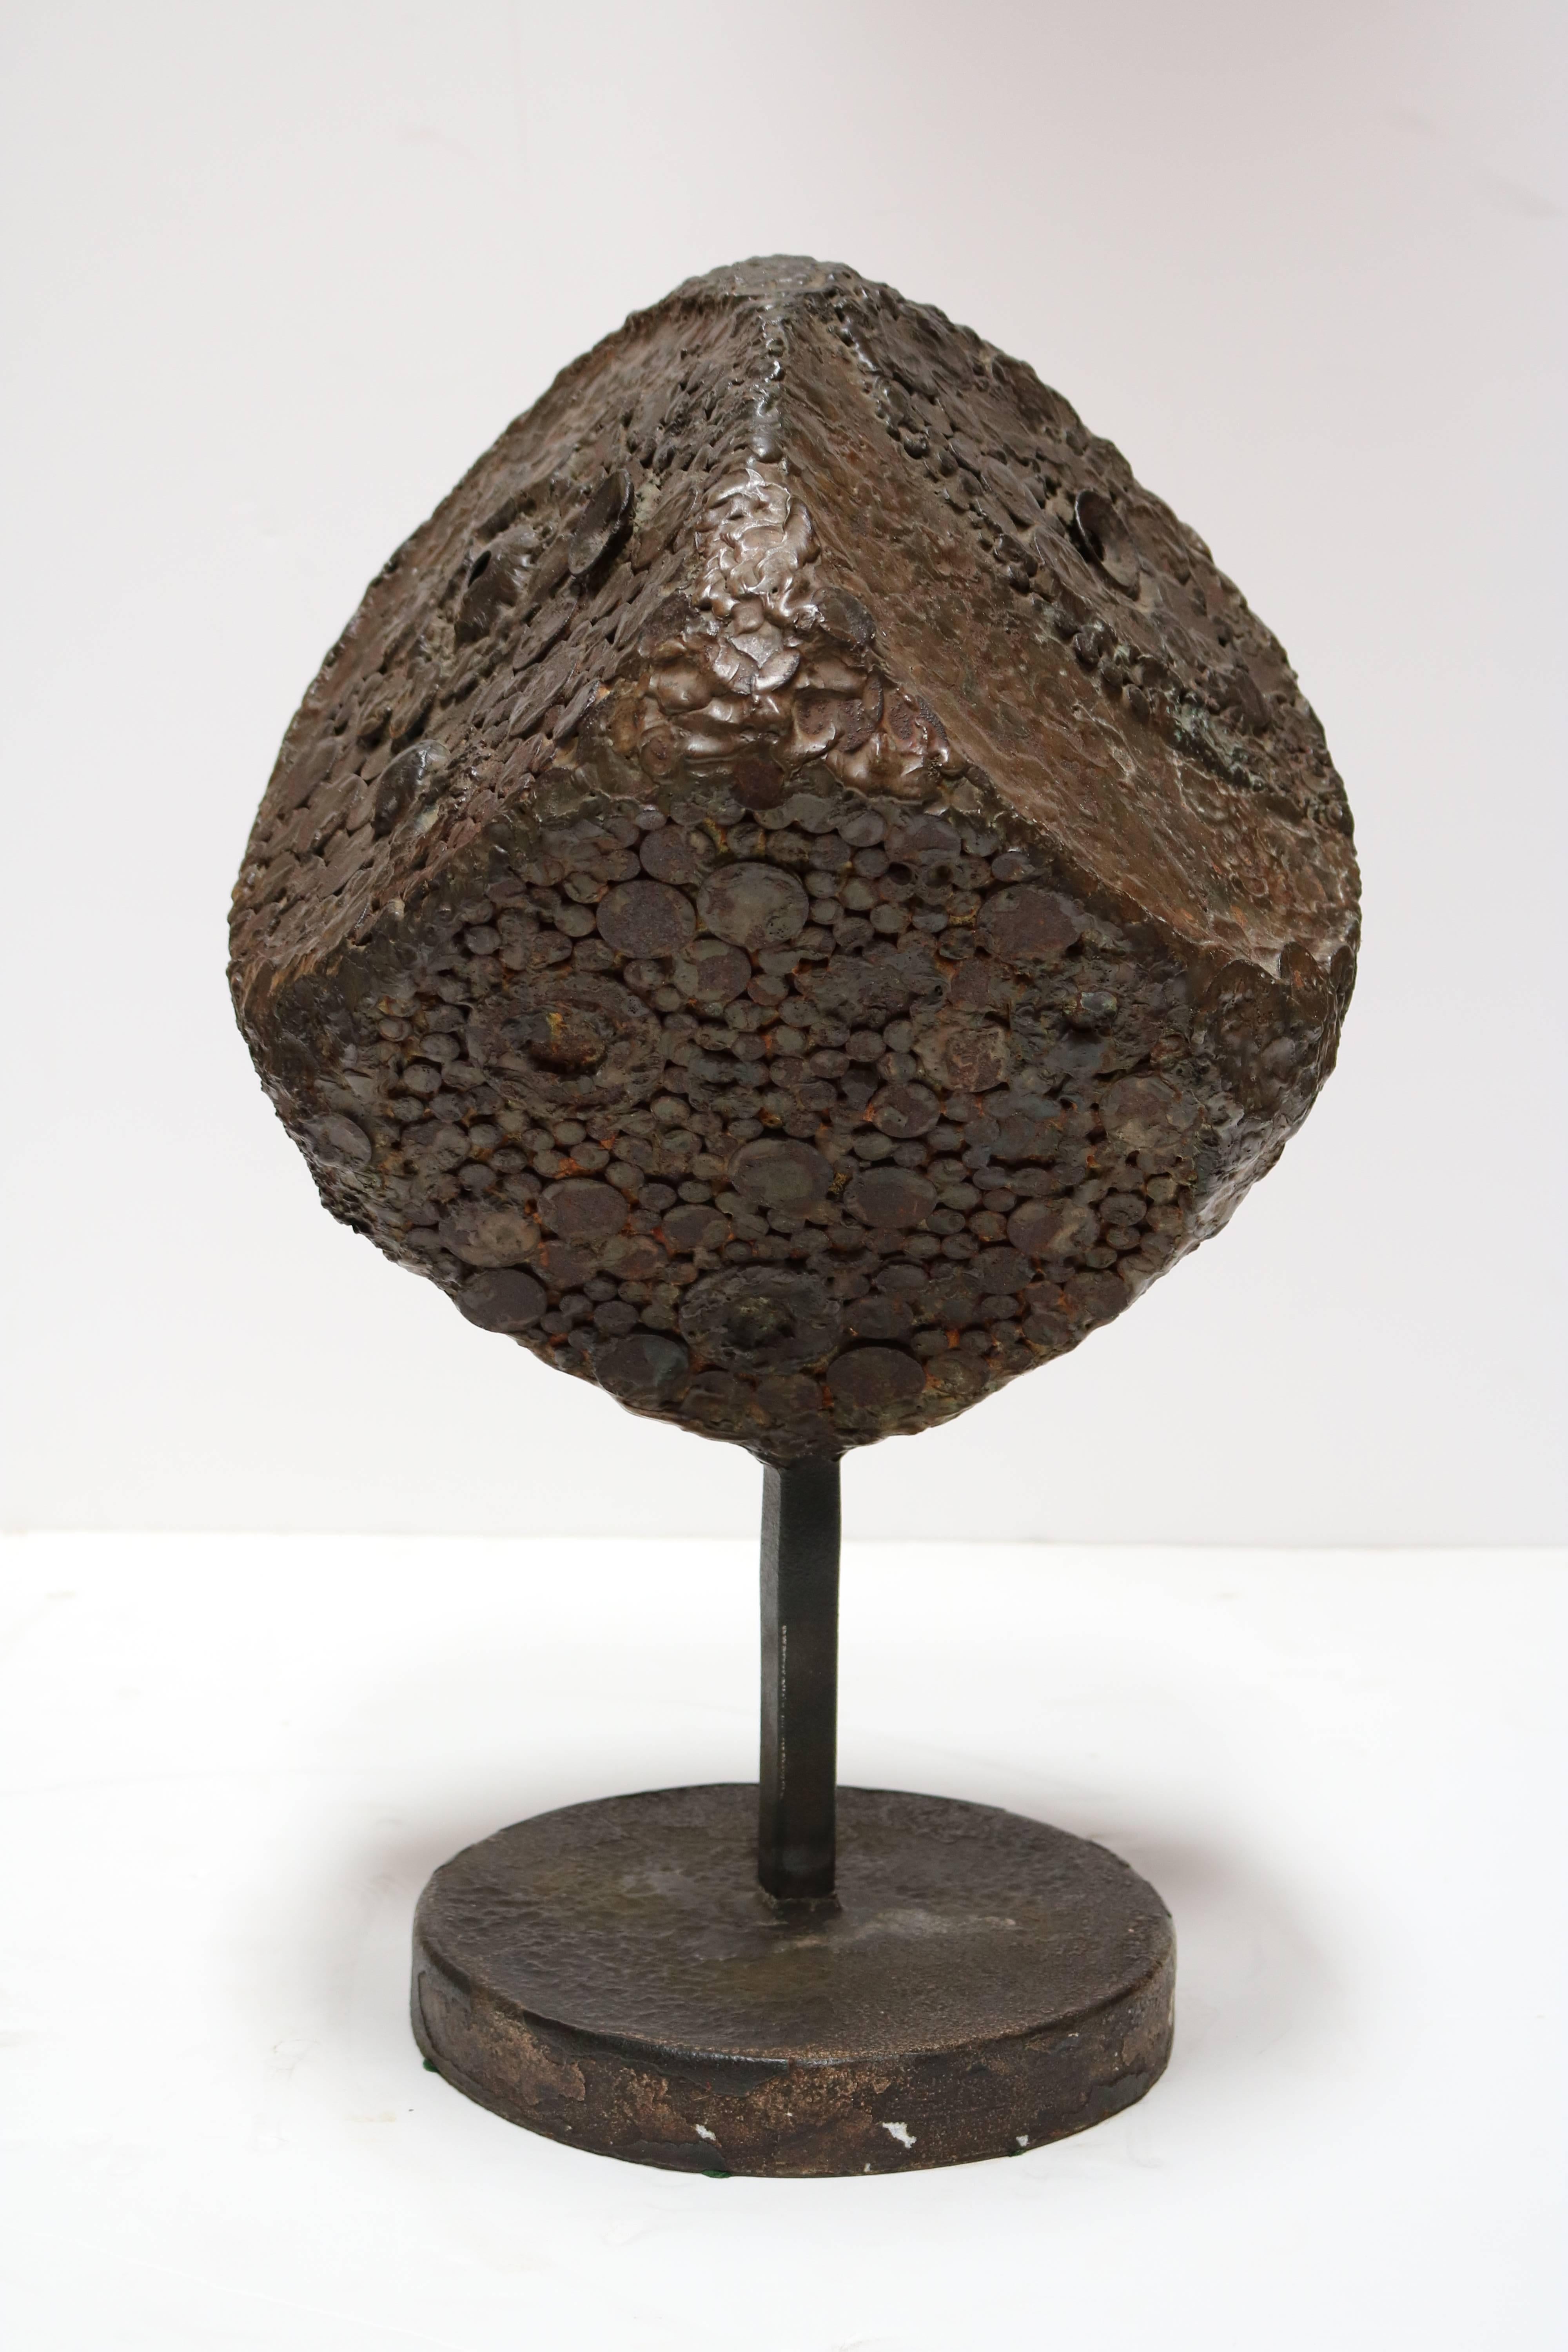 This fascinating sculpture rendered in bronze is composed of a large, highly textured cube supported by a rectangular stem and a circular base. The fascinating, hand-wrought surface of the cube changes from every perspective and light giving the